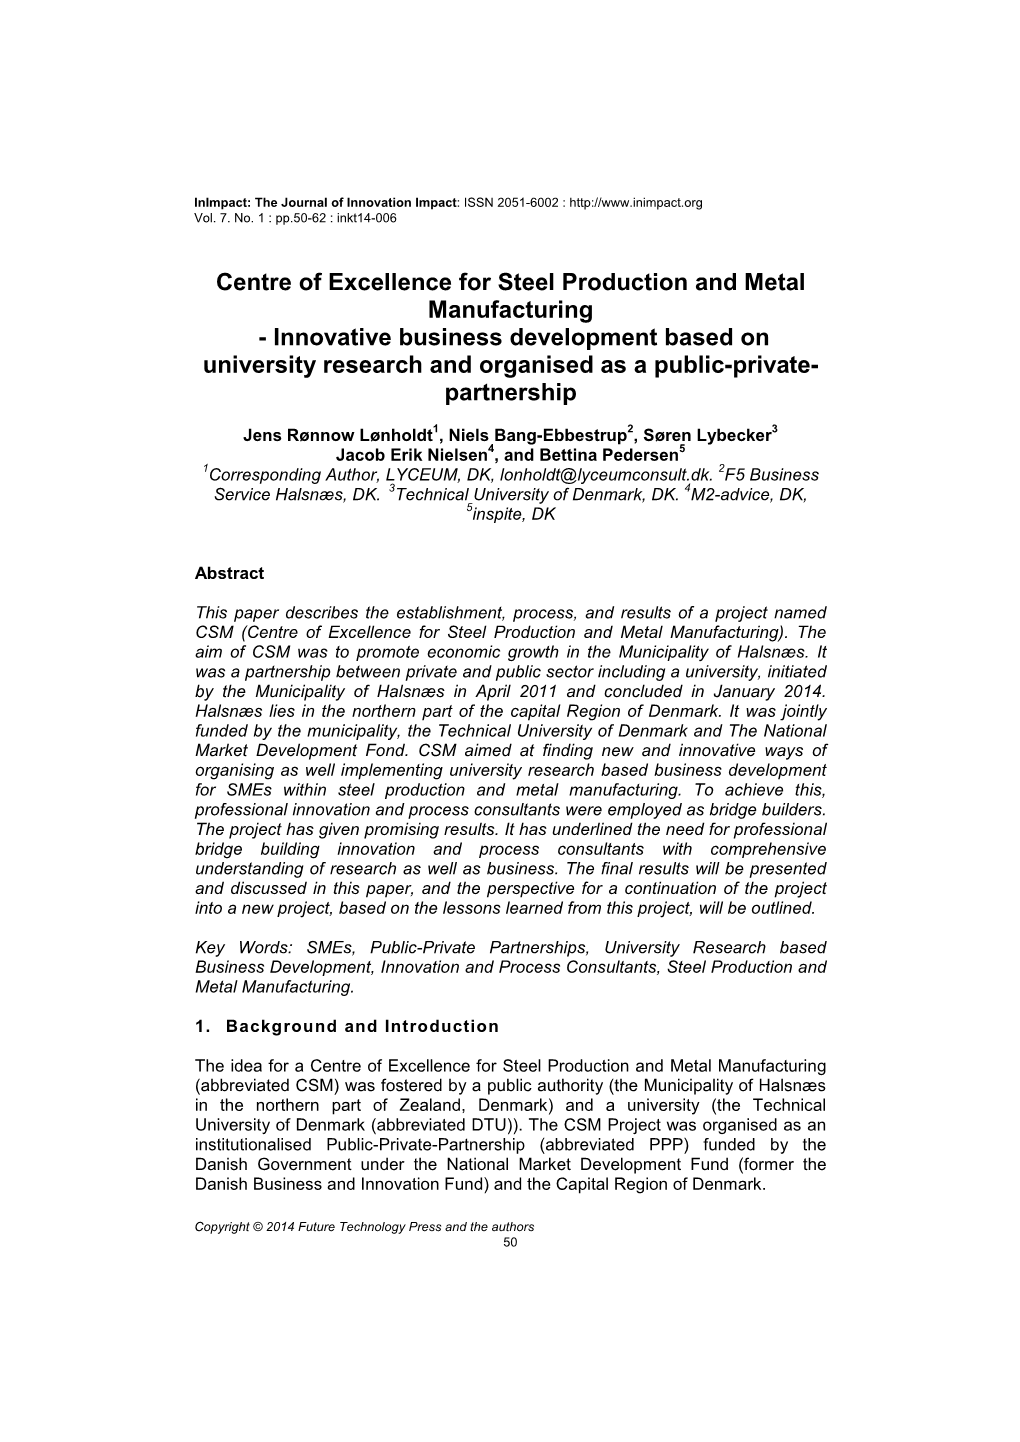 Centre of Excellence for Steel Production and Metal Manufacturing